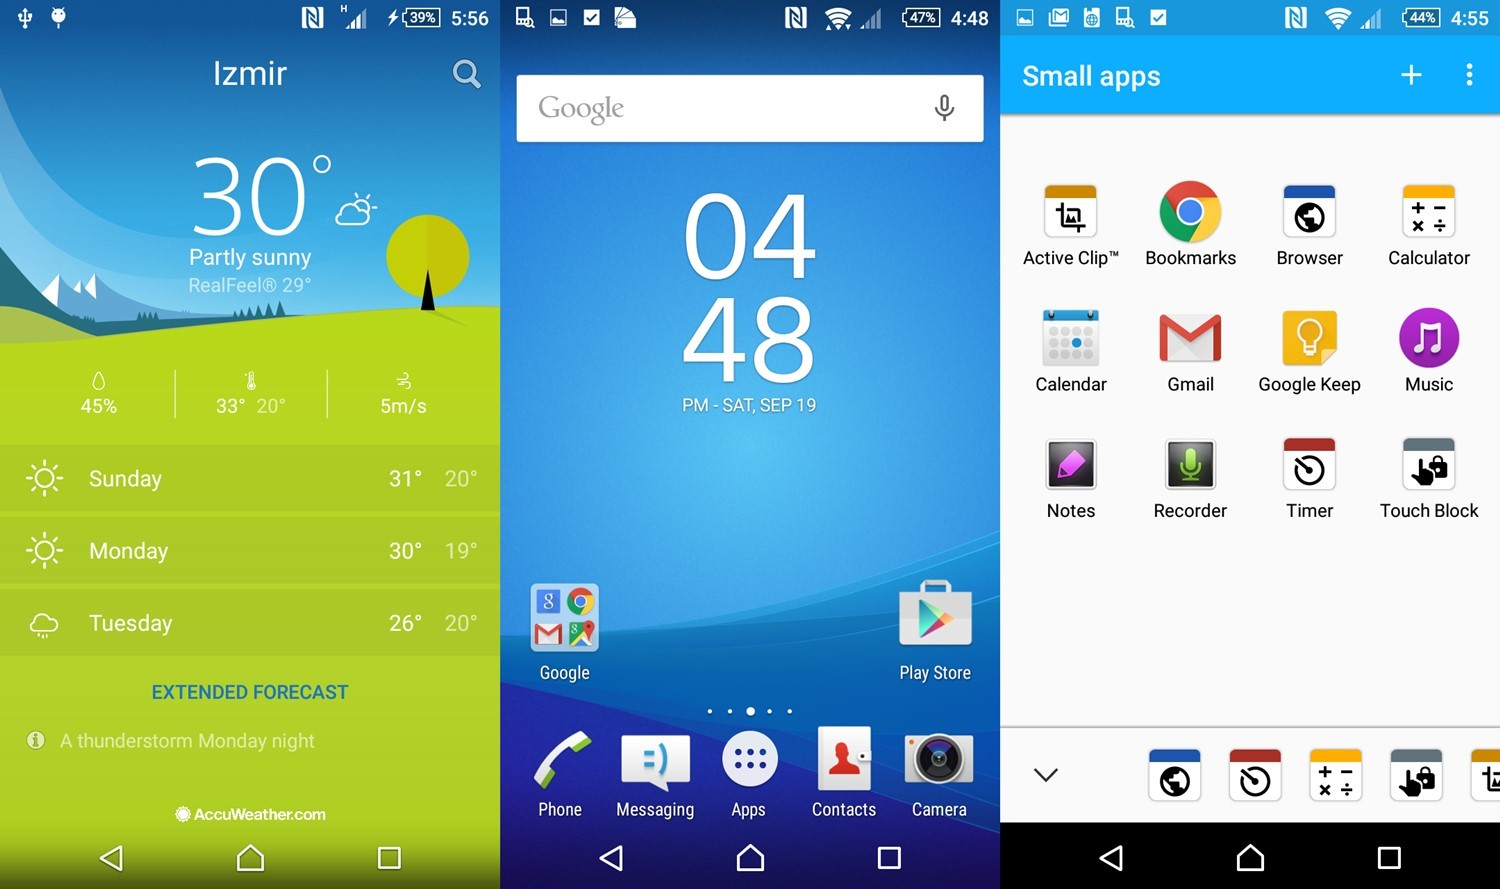 Download 15+ Sony Xperia Z5 Apps [Launcher, Phone, Camera, Calendar